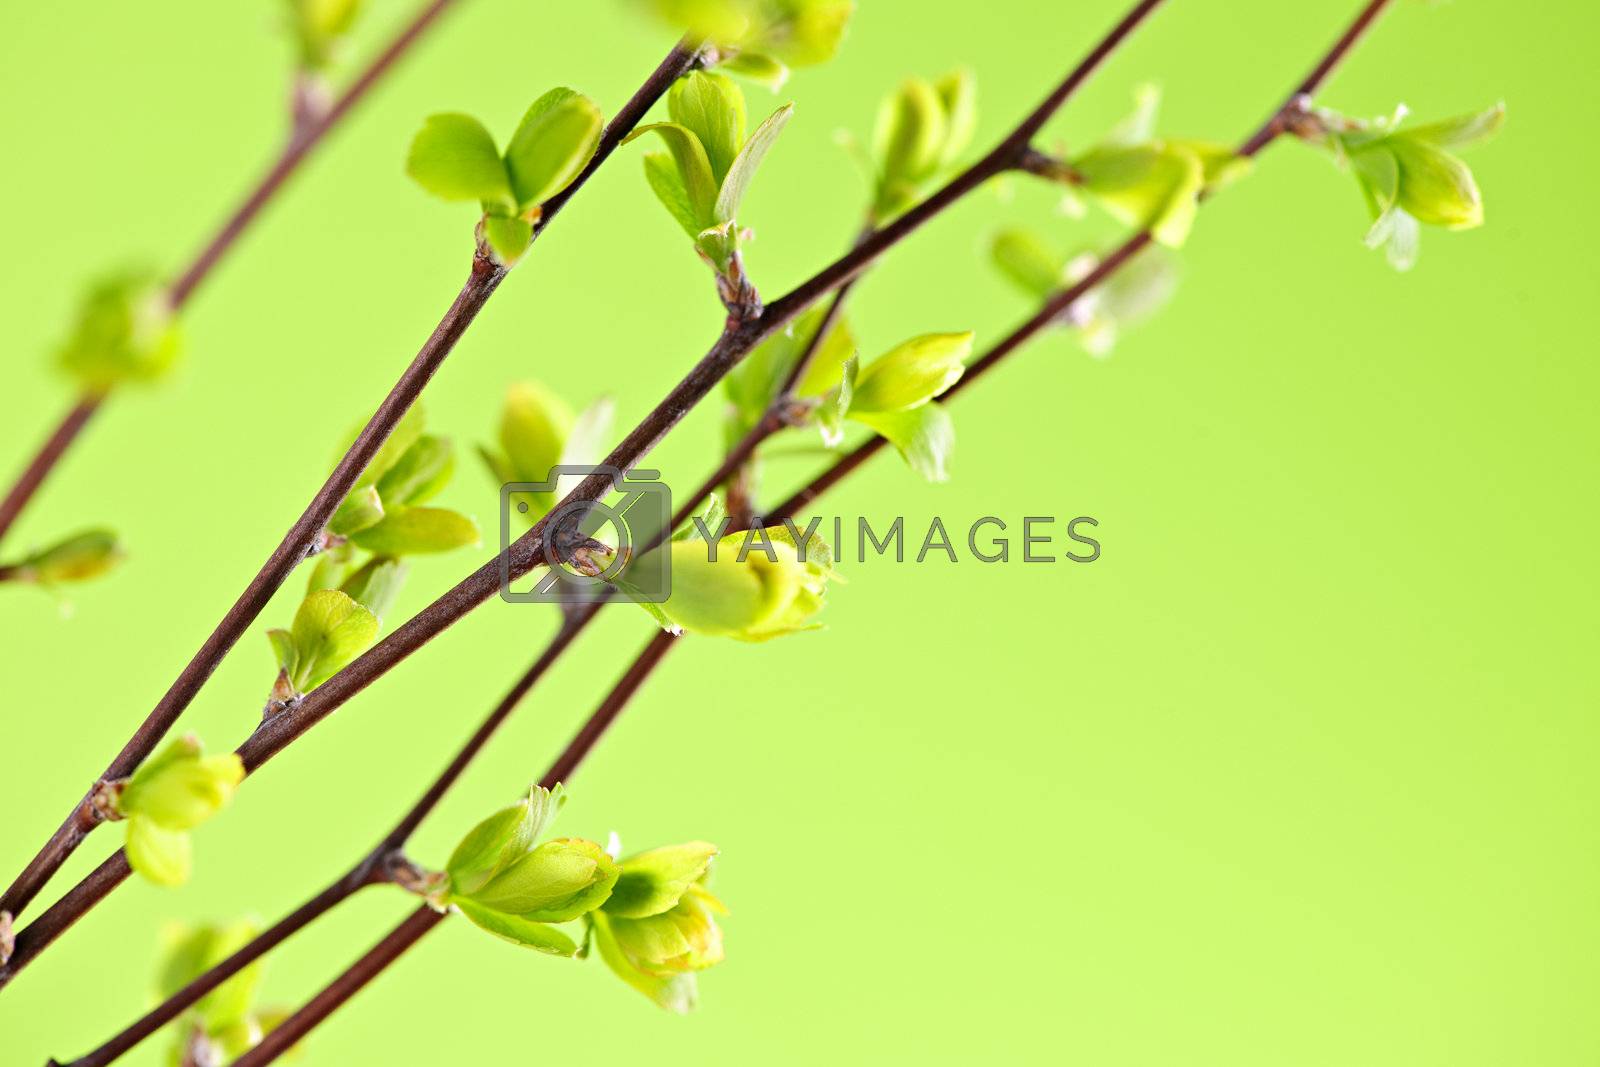 Royalty free image of Branches with green spring leaves by elenathewise